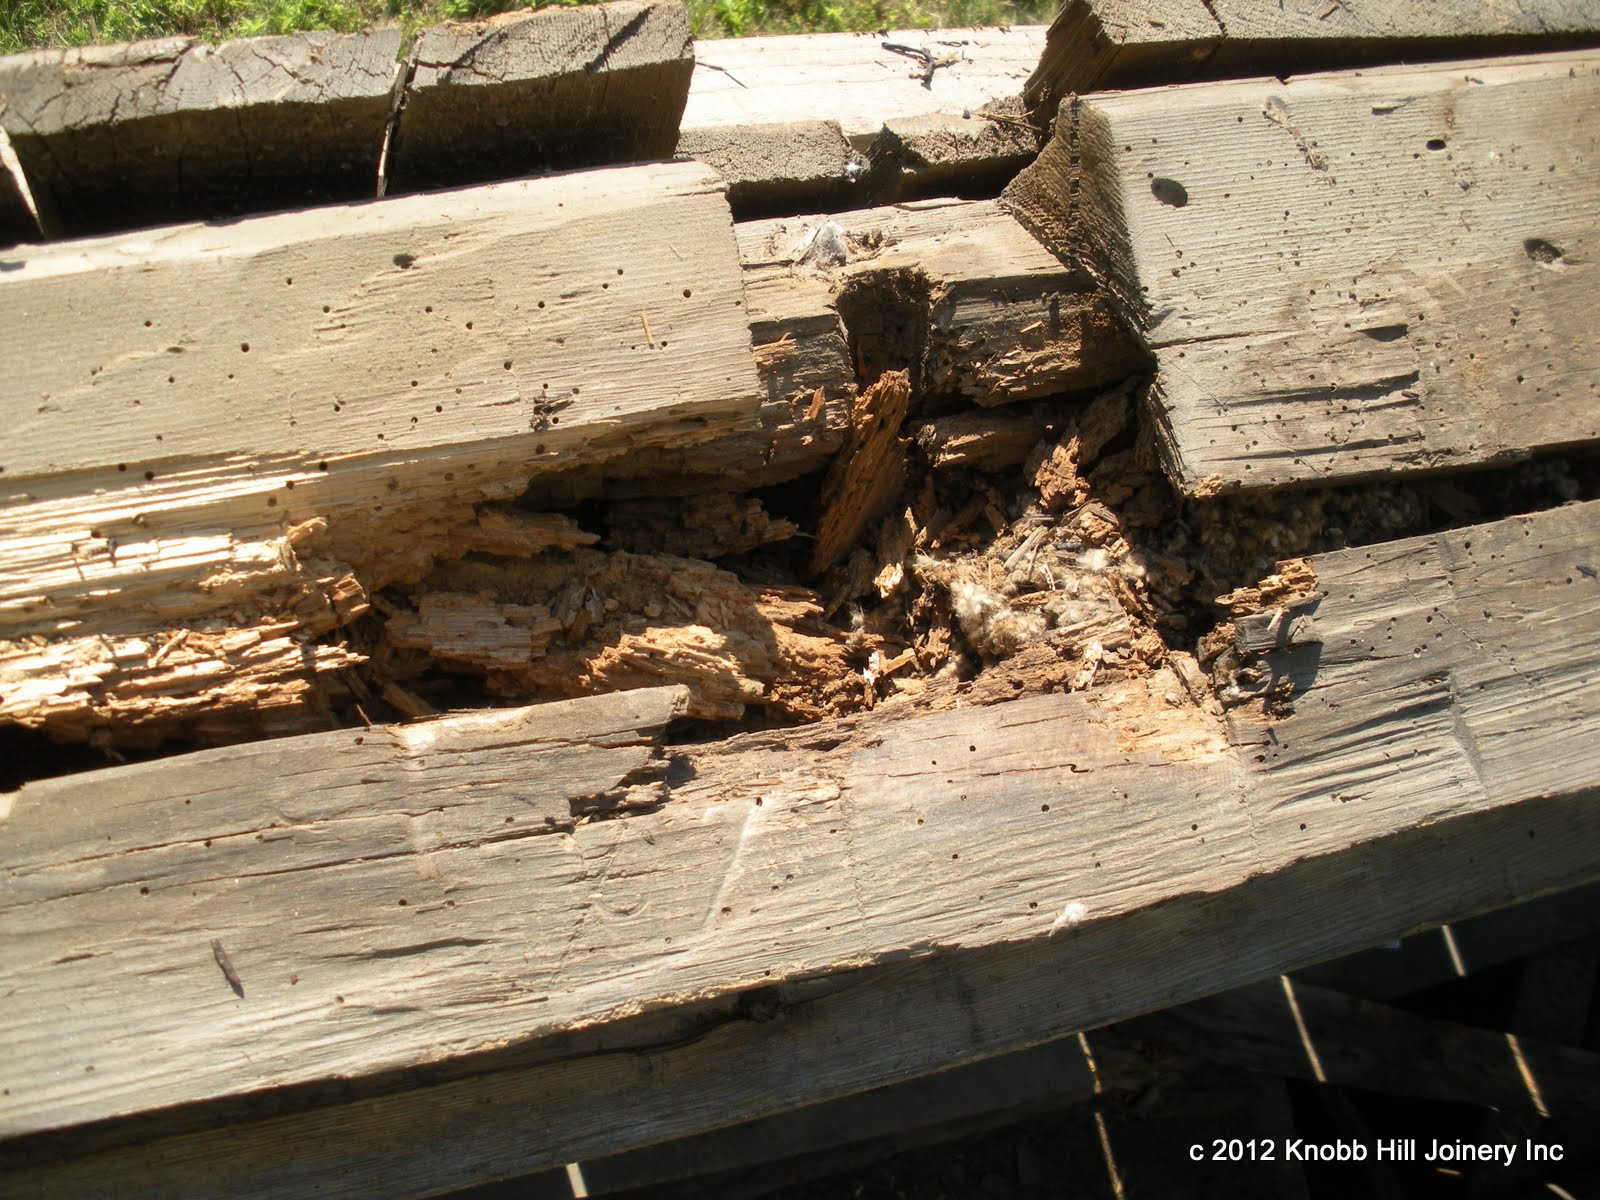 Three out of the four plate timbers were fractured and hollow.